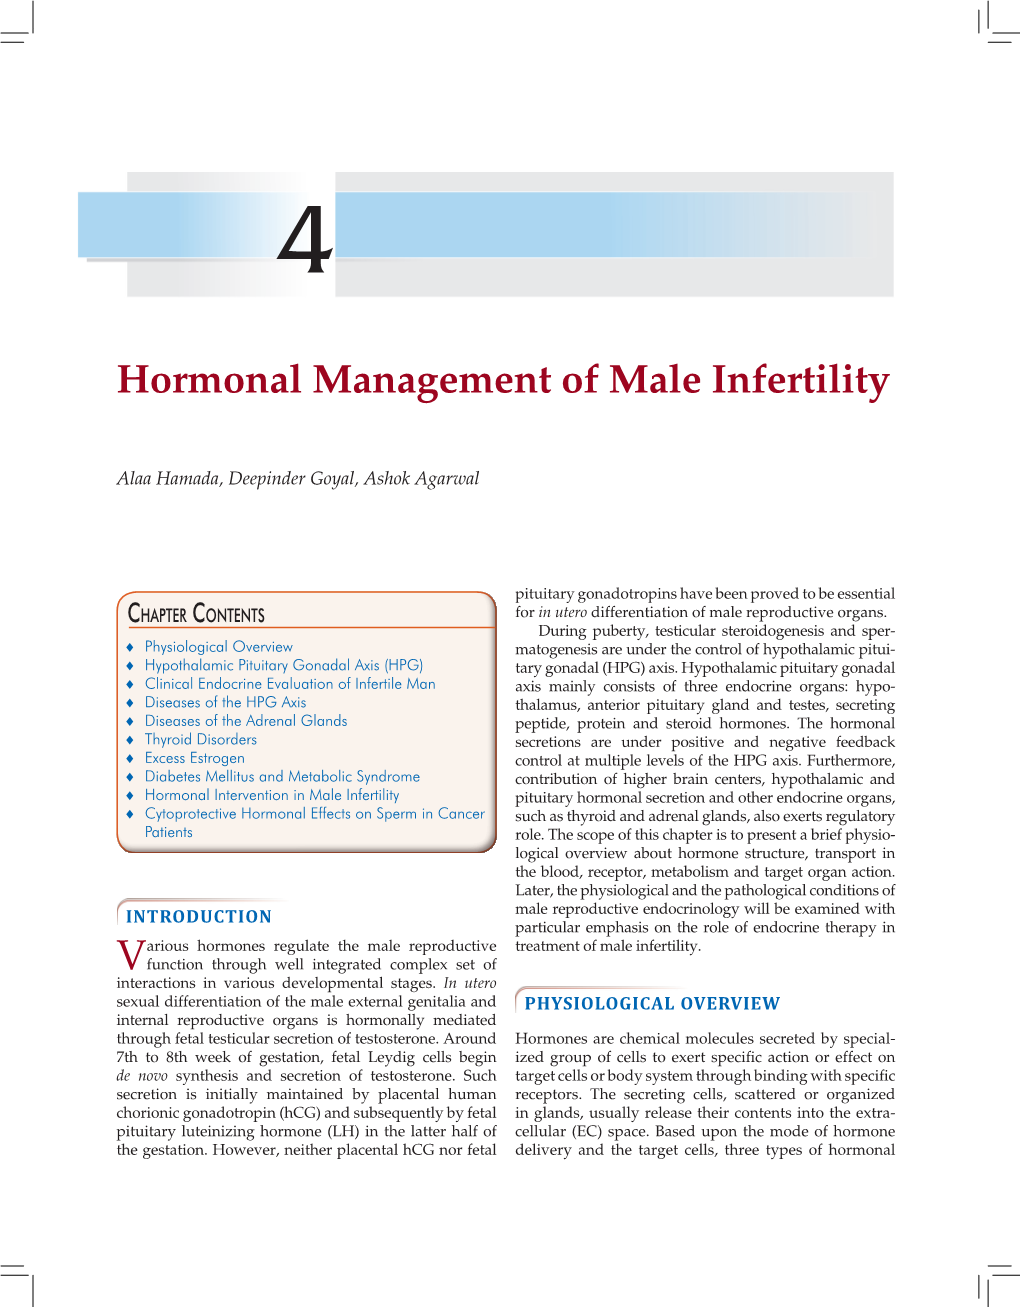 Hormonal Management of Male Infertility